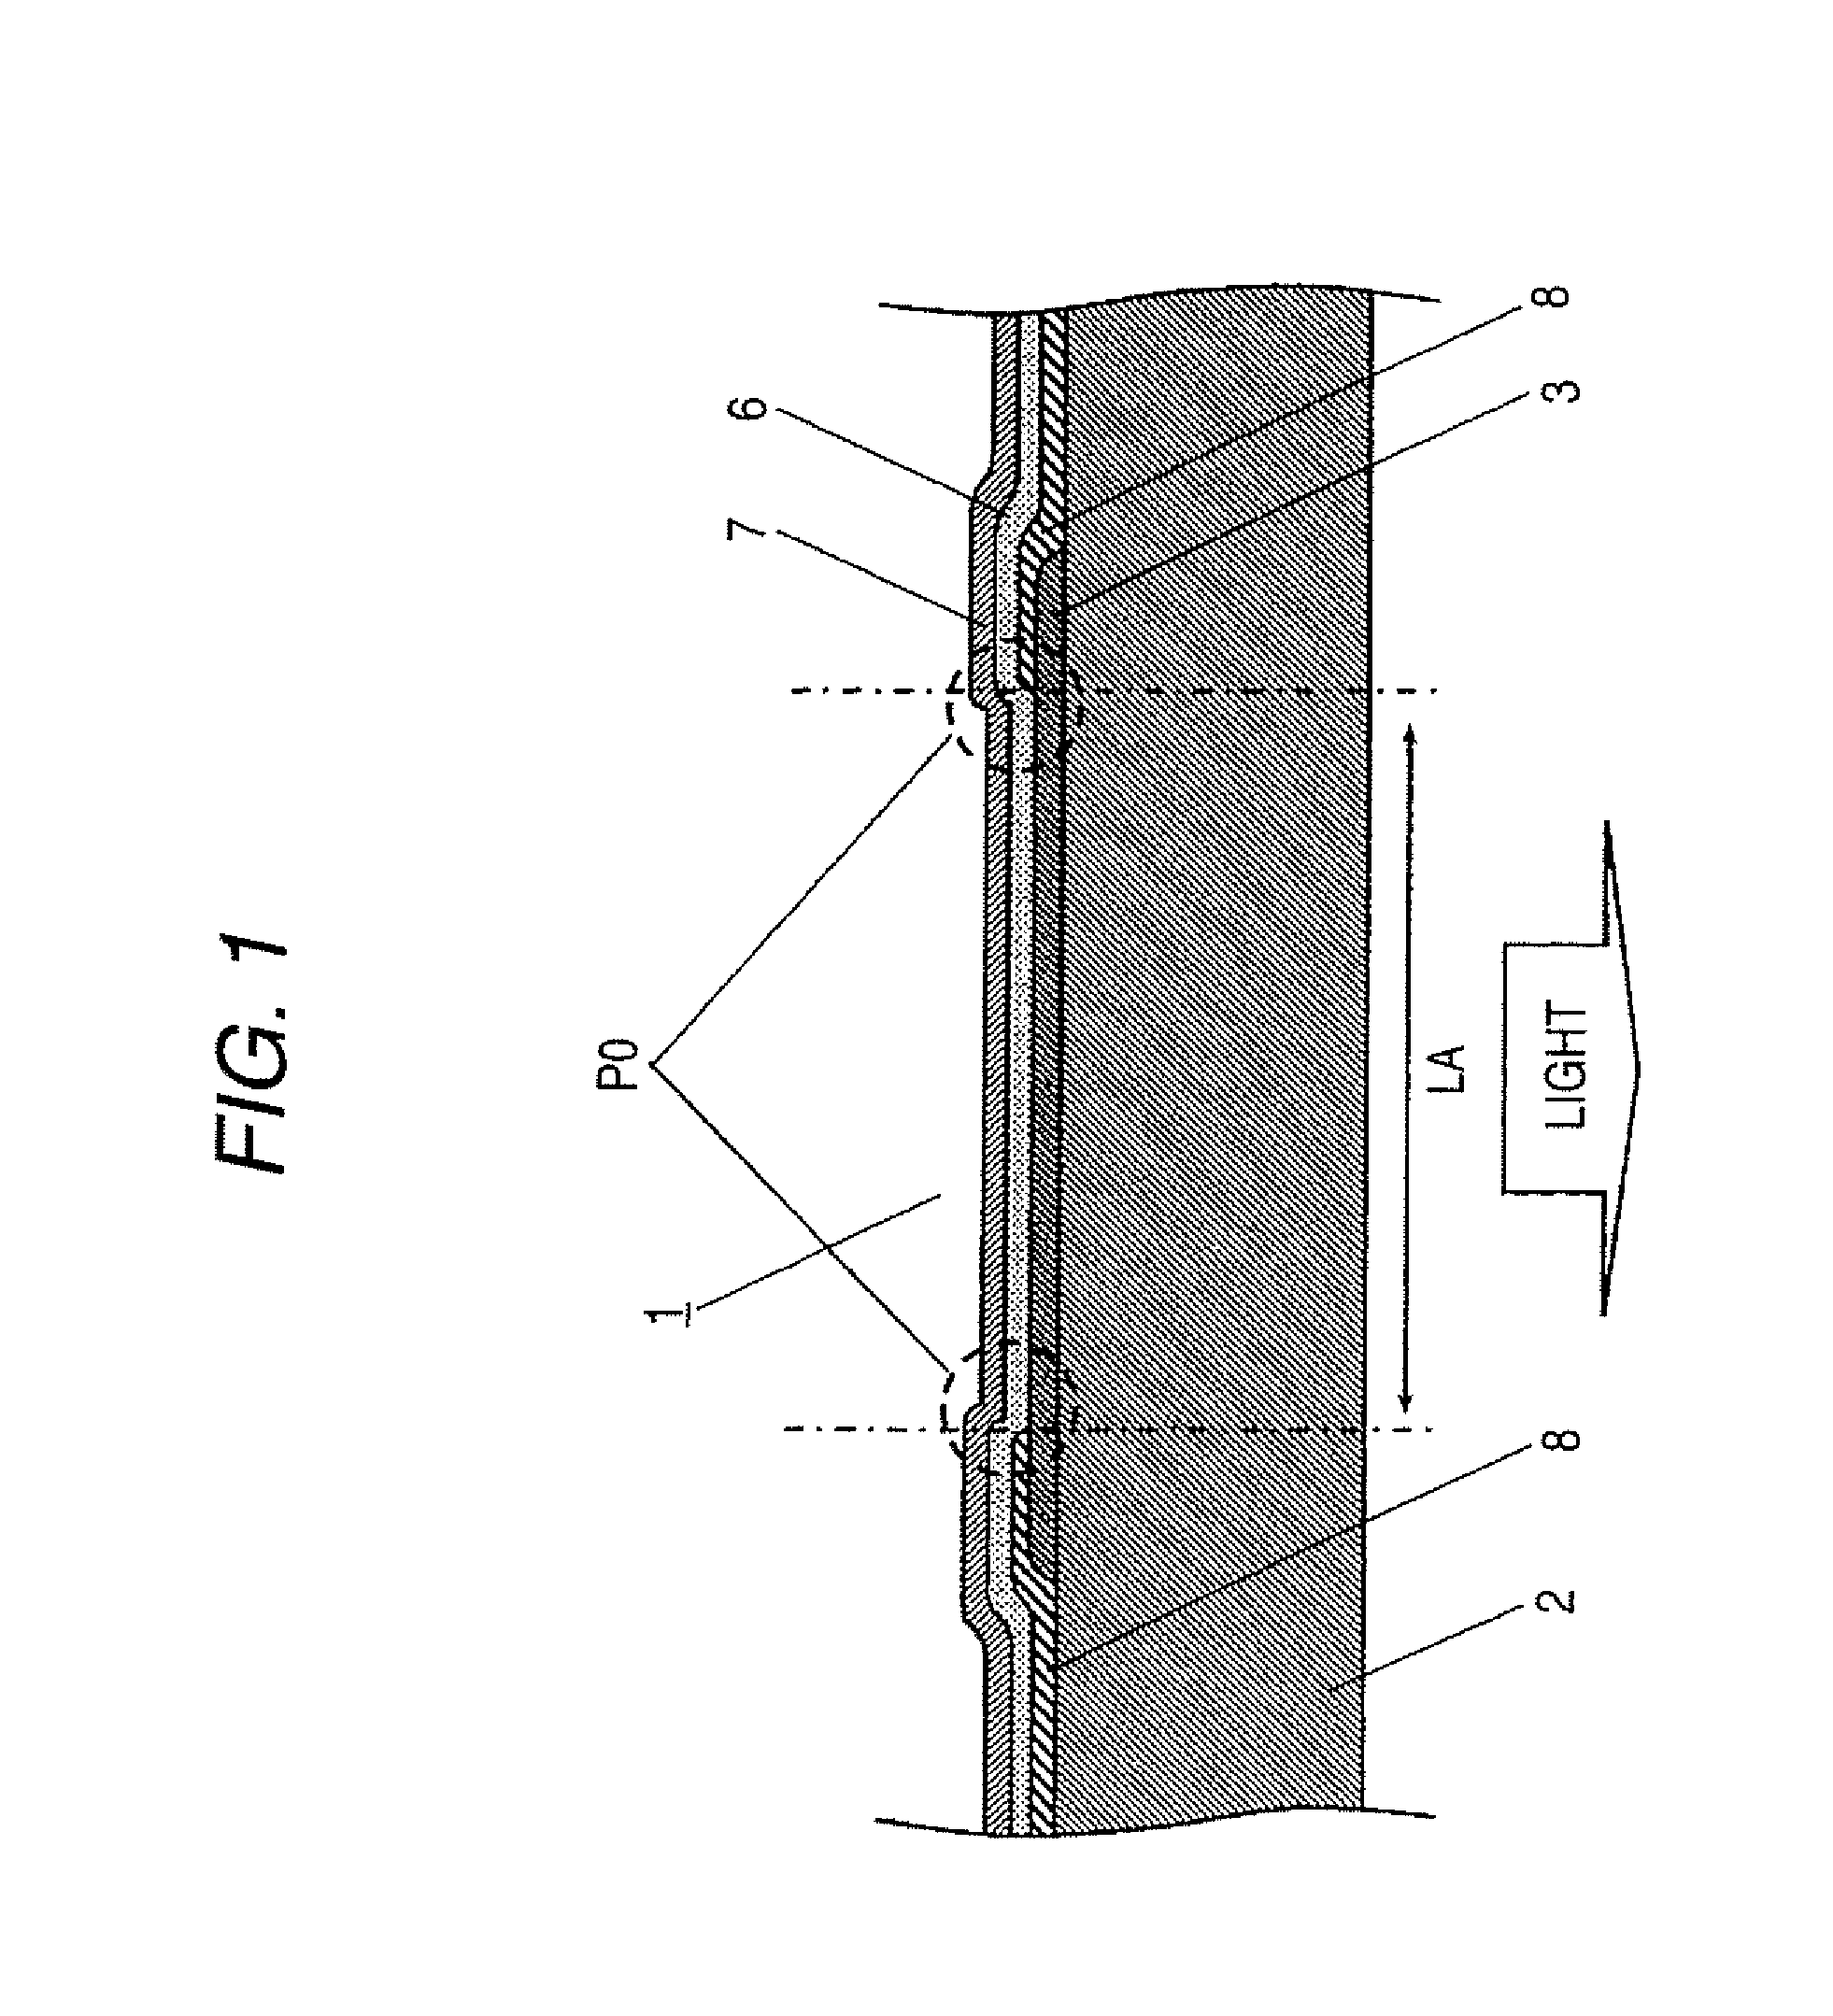 Organic electroluminescence element, exposure device and image forming